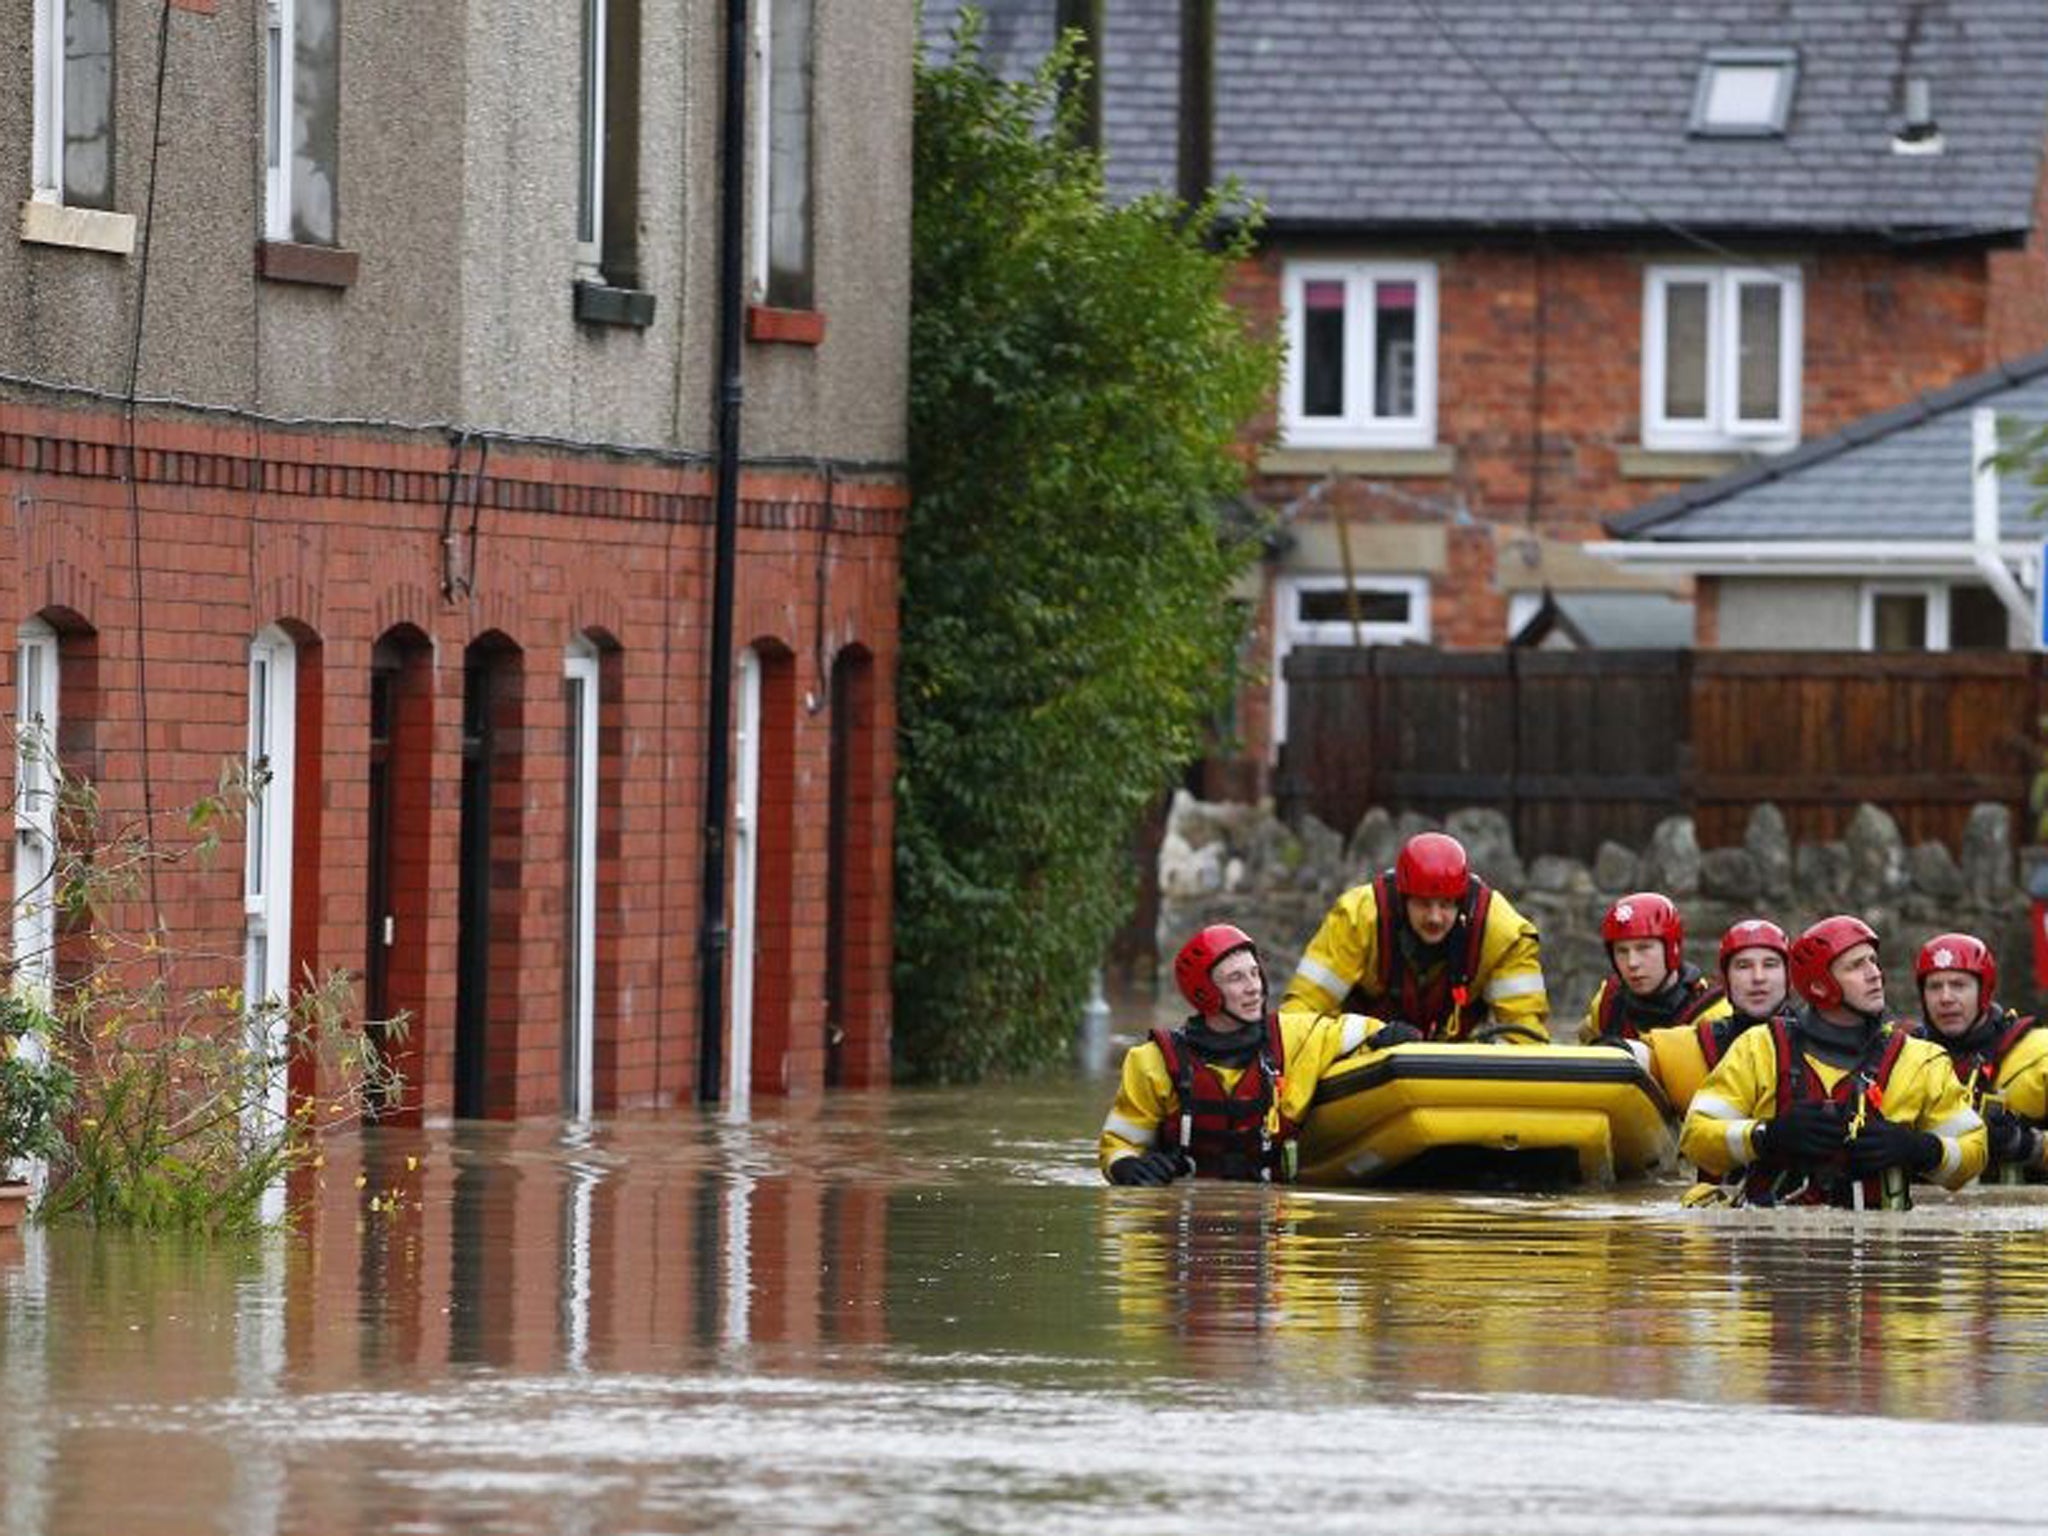 A crew from the North Wales Fire and Rescue service help a resident to safety in St. Asaph, Denbighshire, North Wales